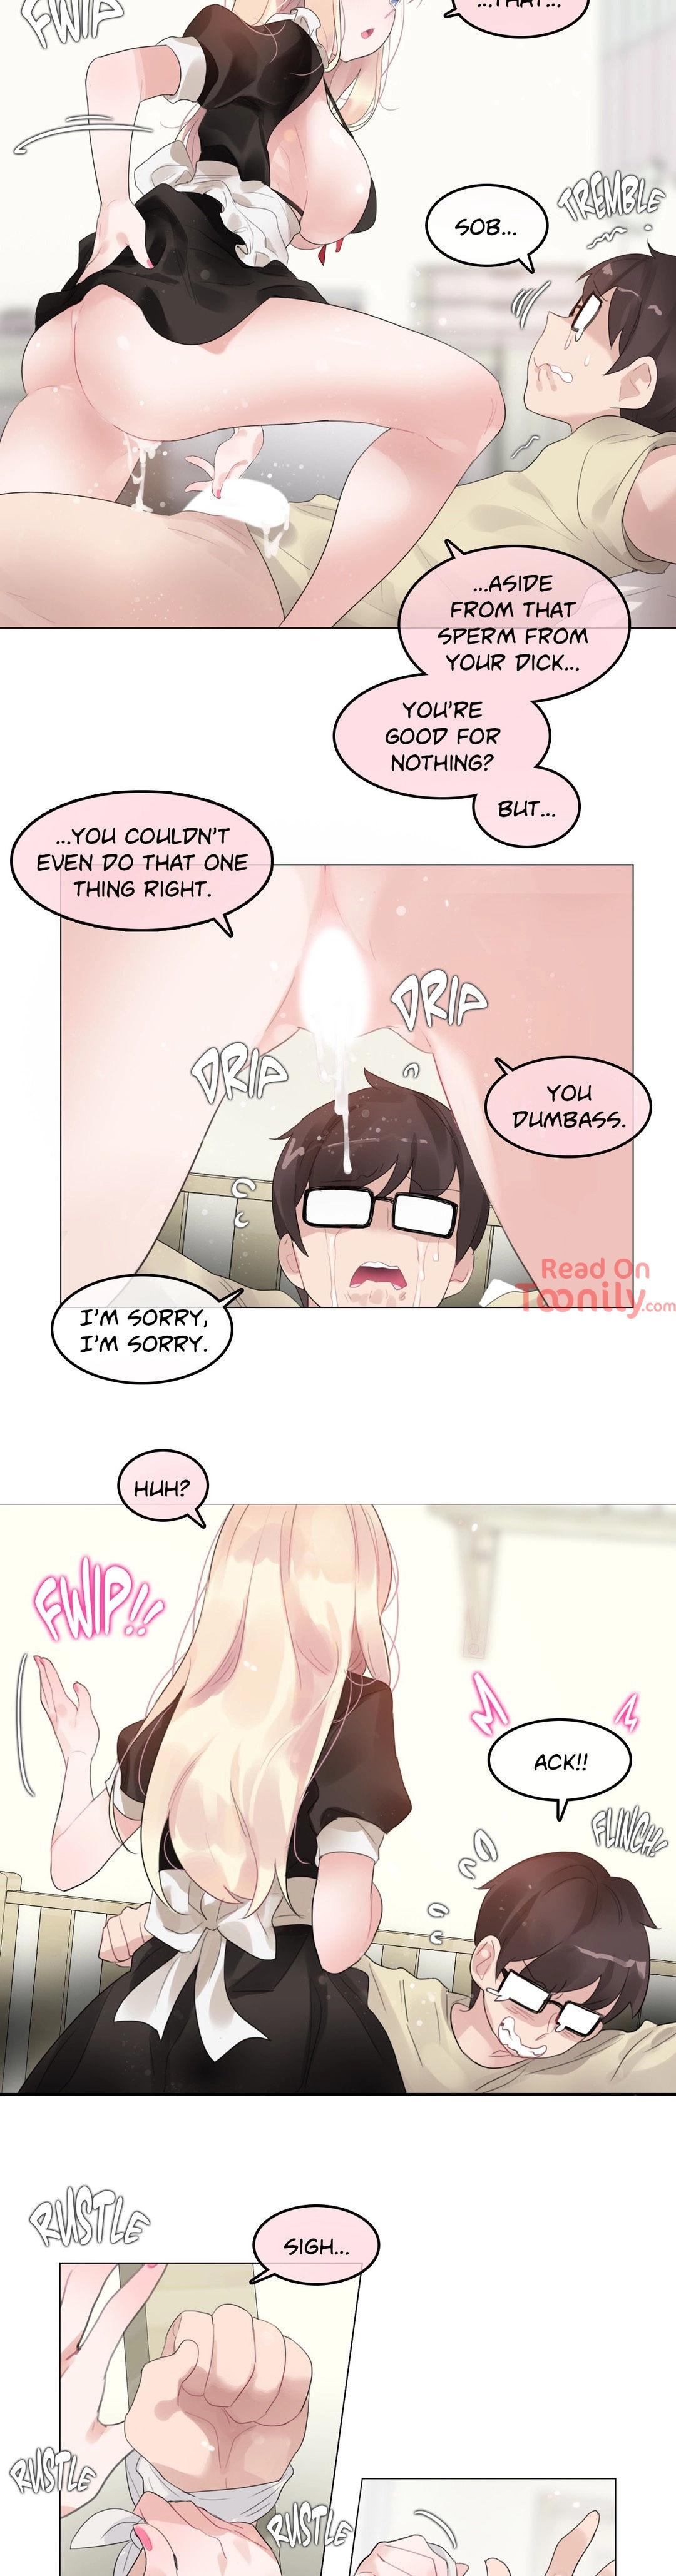 A Pervert's Daily Life • Chapter 66-70 104